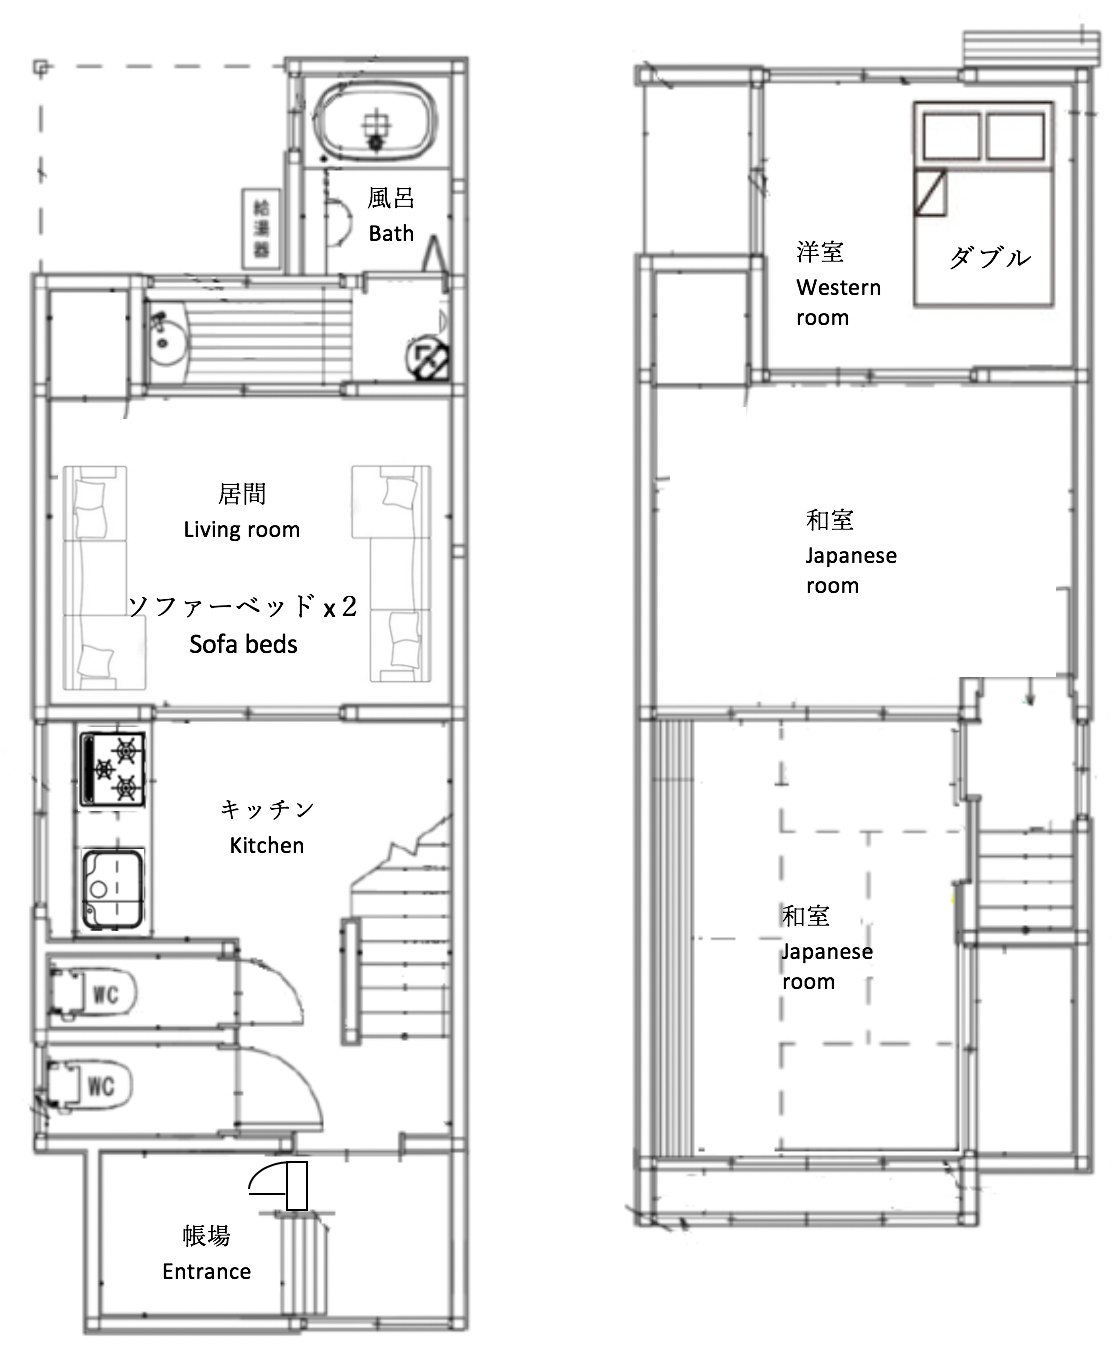 Kyoto guesthouse 京都　ゲストハウス　6人